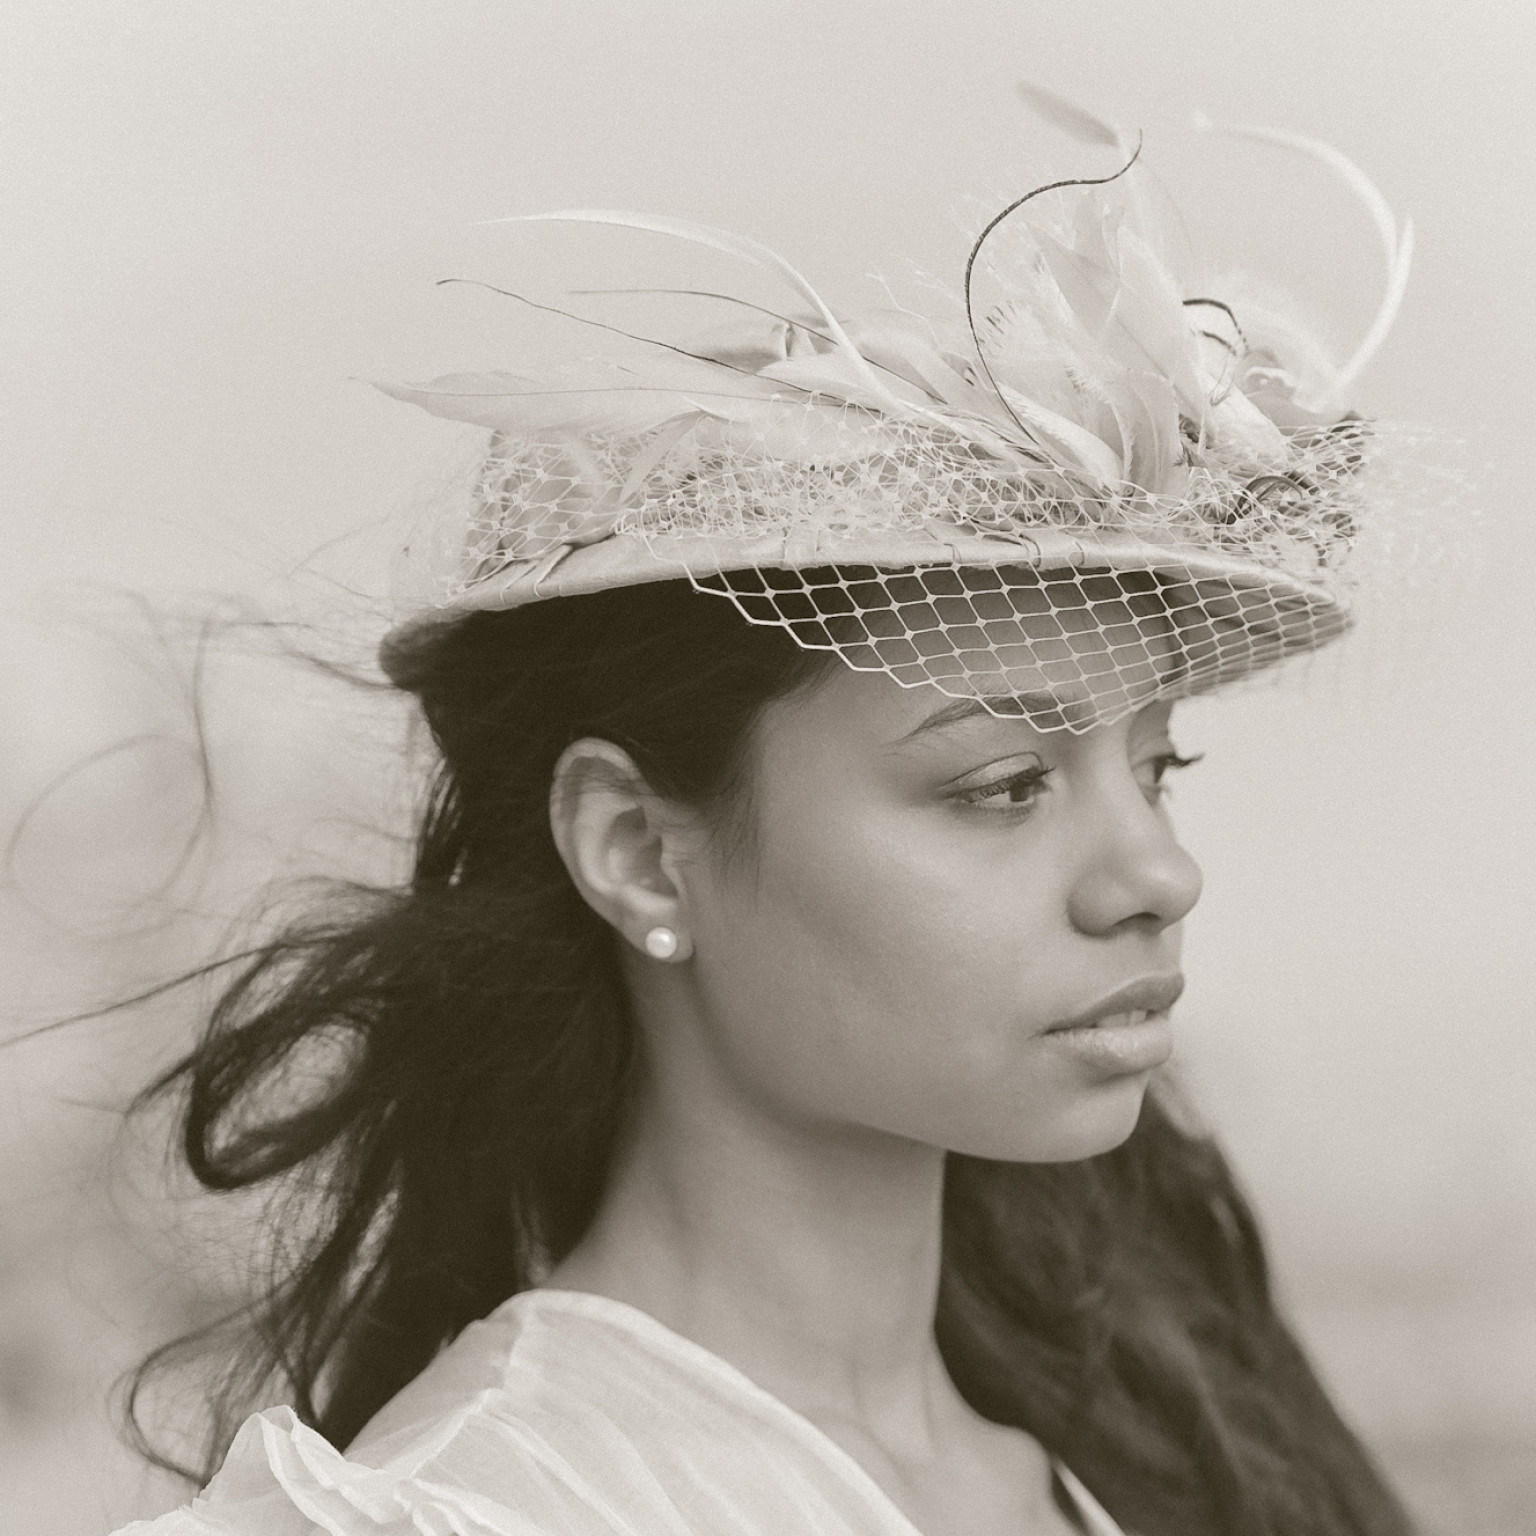 Wedding Hats To Suit Brides And Guests Alike (PHOTOS) | HuffPost